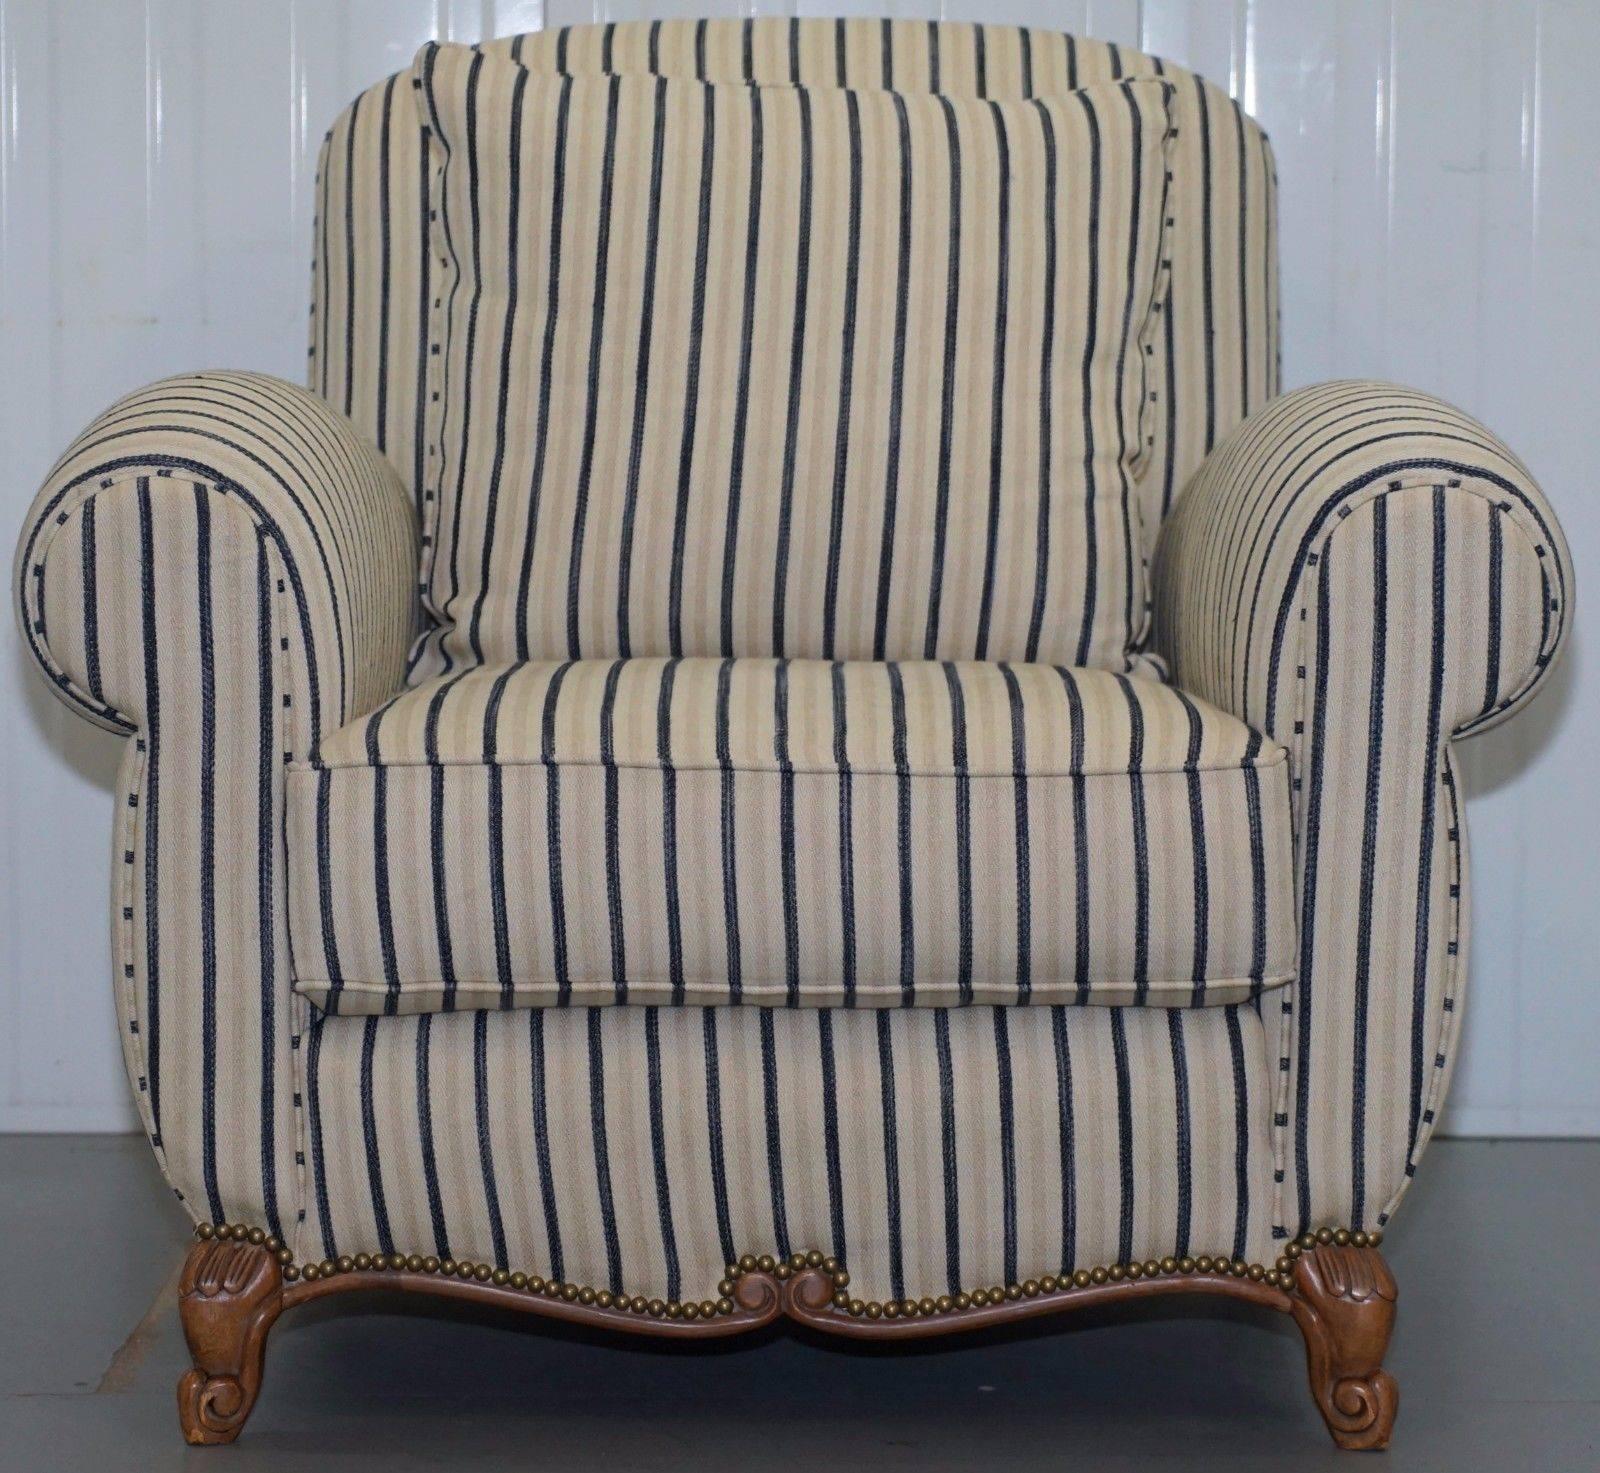 Wimbledon-Furniture

Wimbledon-Furniture is delighted to offer for sale this stunning RRP £6000 Ralph Lauren Marseilles Club armchair made with a Fruitwood frame and having feather filled cushions

This is one of the most comfortable and